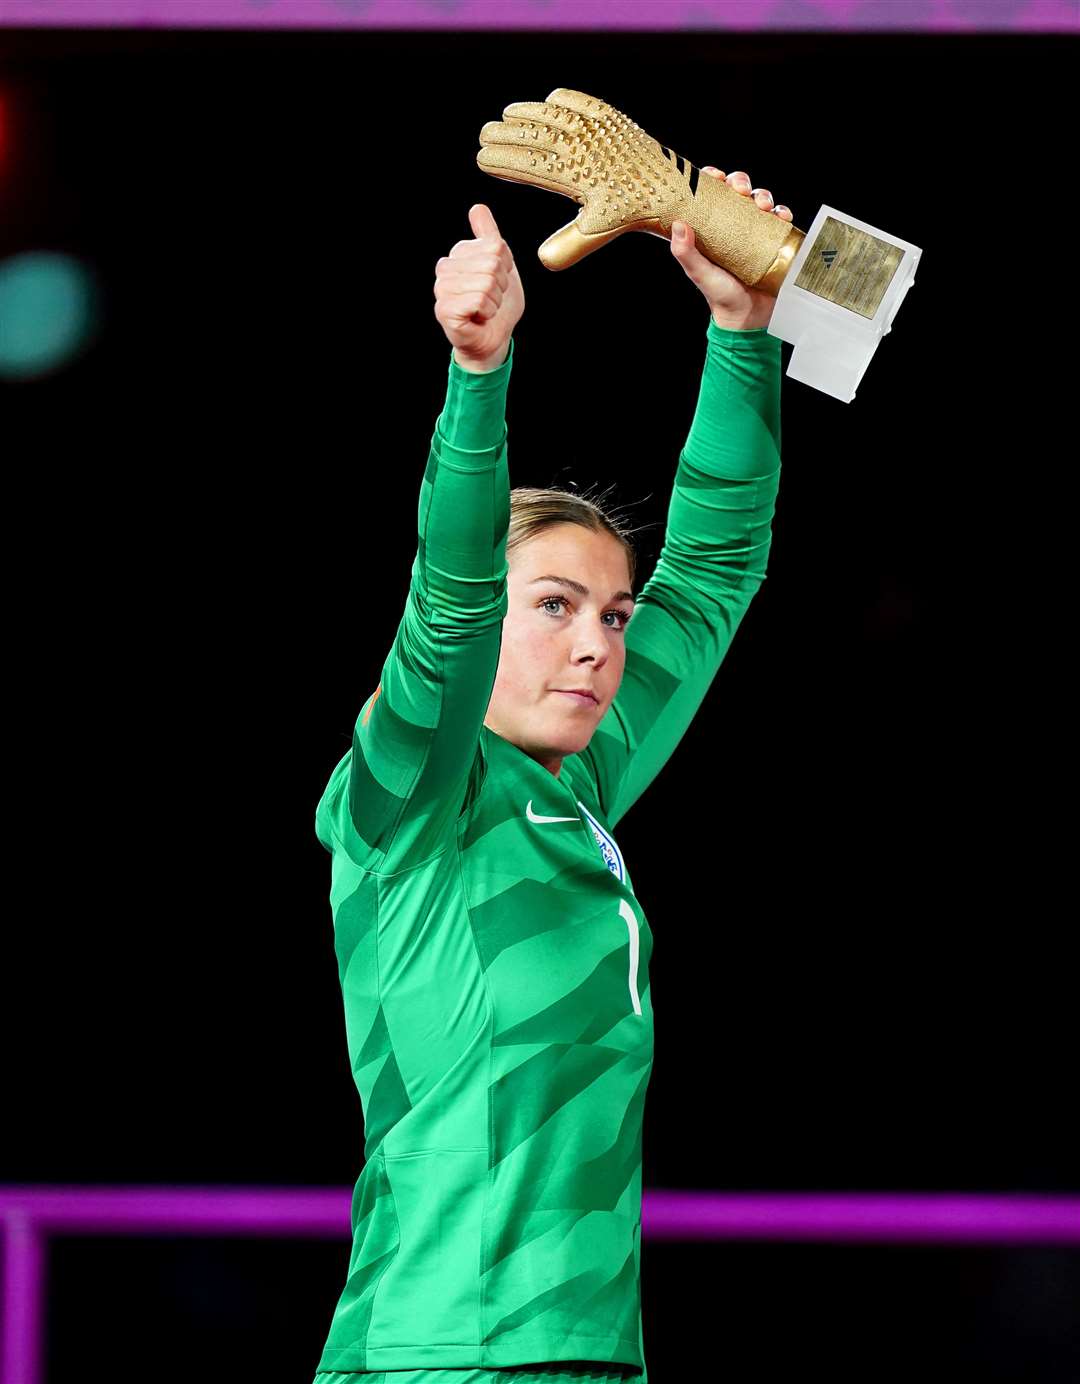 England goalkeeper Mary Earps gestures to the fans after collecting her Golden Glove award at the end of the FIFA Women’s World Cup (Zac Goodwin/PA)